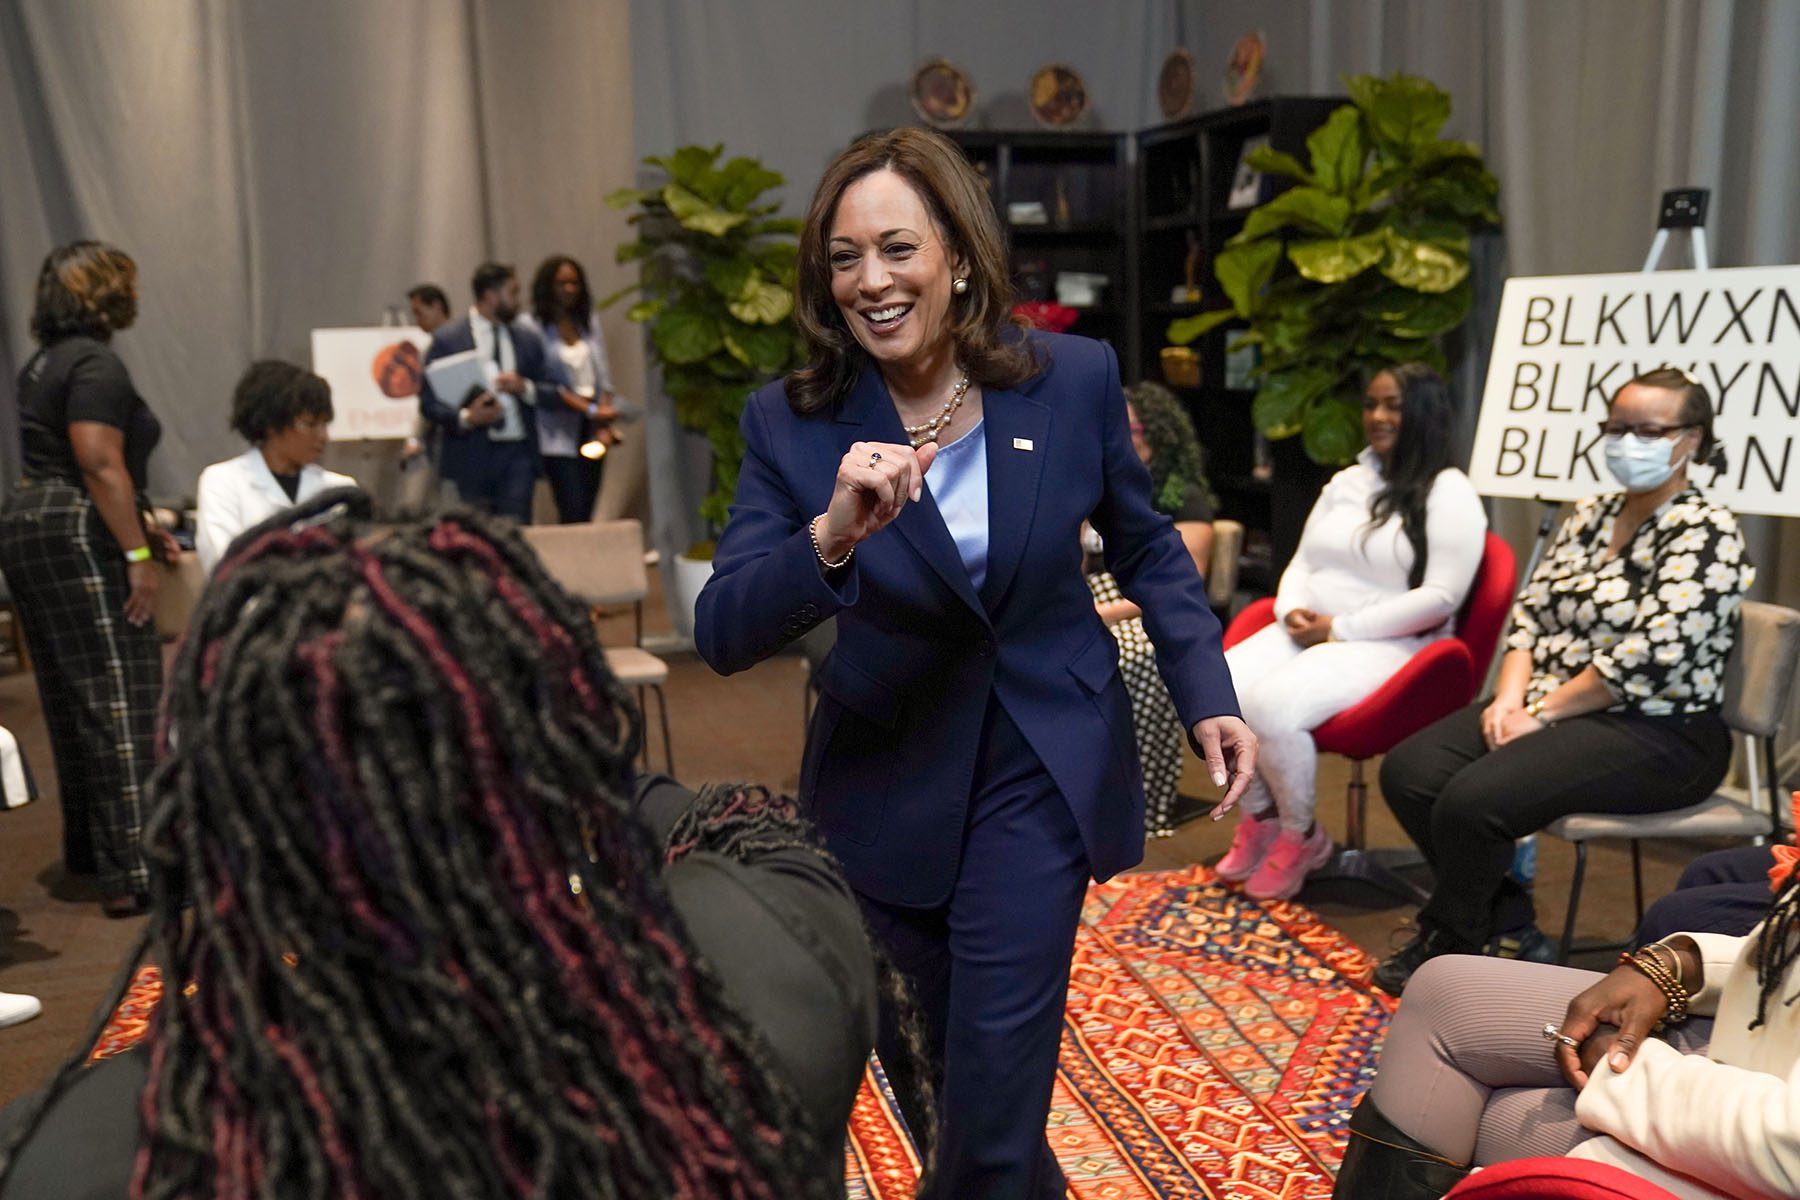 Harris smiles as she gives somebody an elbow bump as others black women sit in chair in a circle.